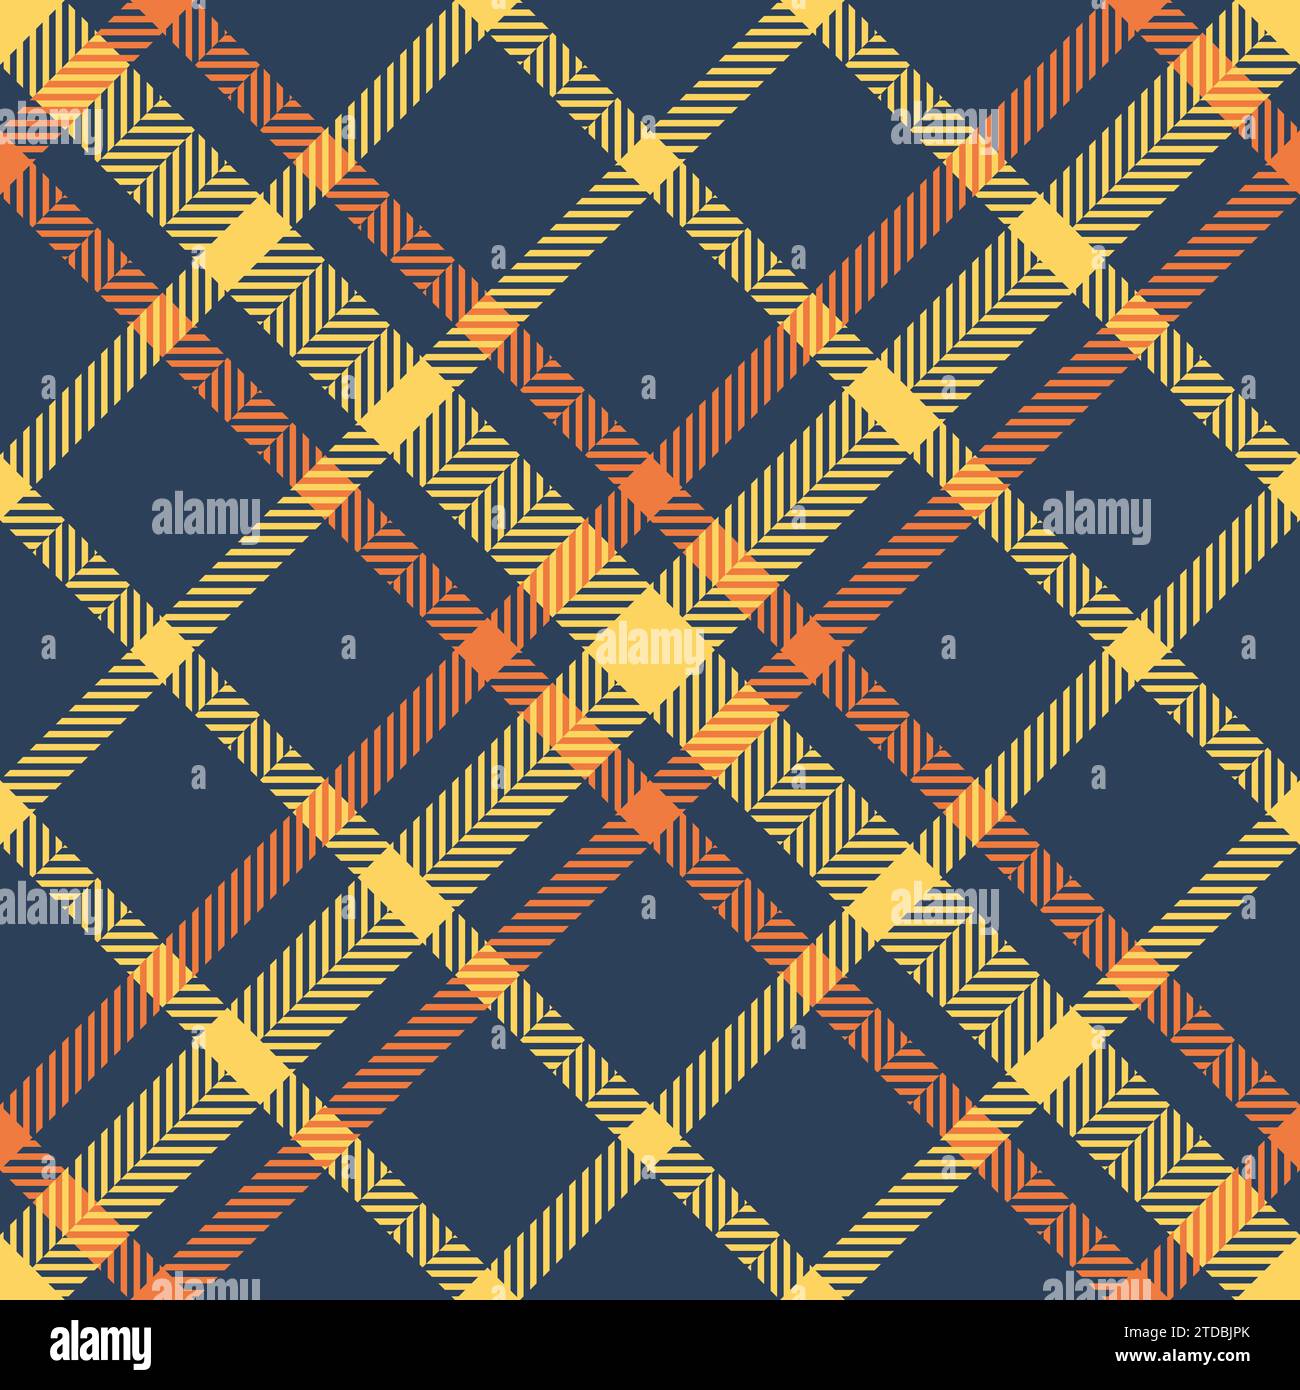 Tartan pattern texture of check fabric plaid with a seamless textile background vector in blue and amber colors. Stock Vector